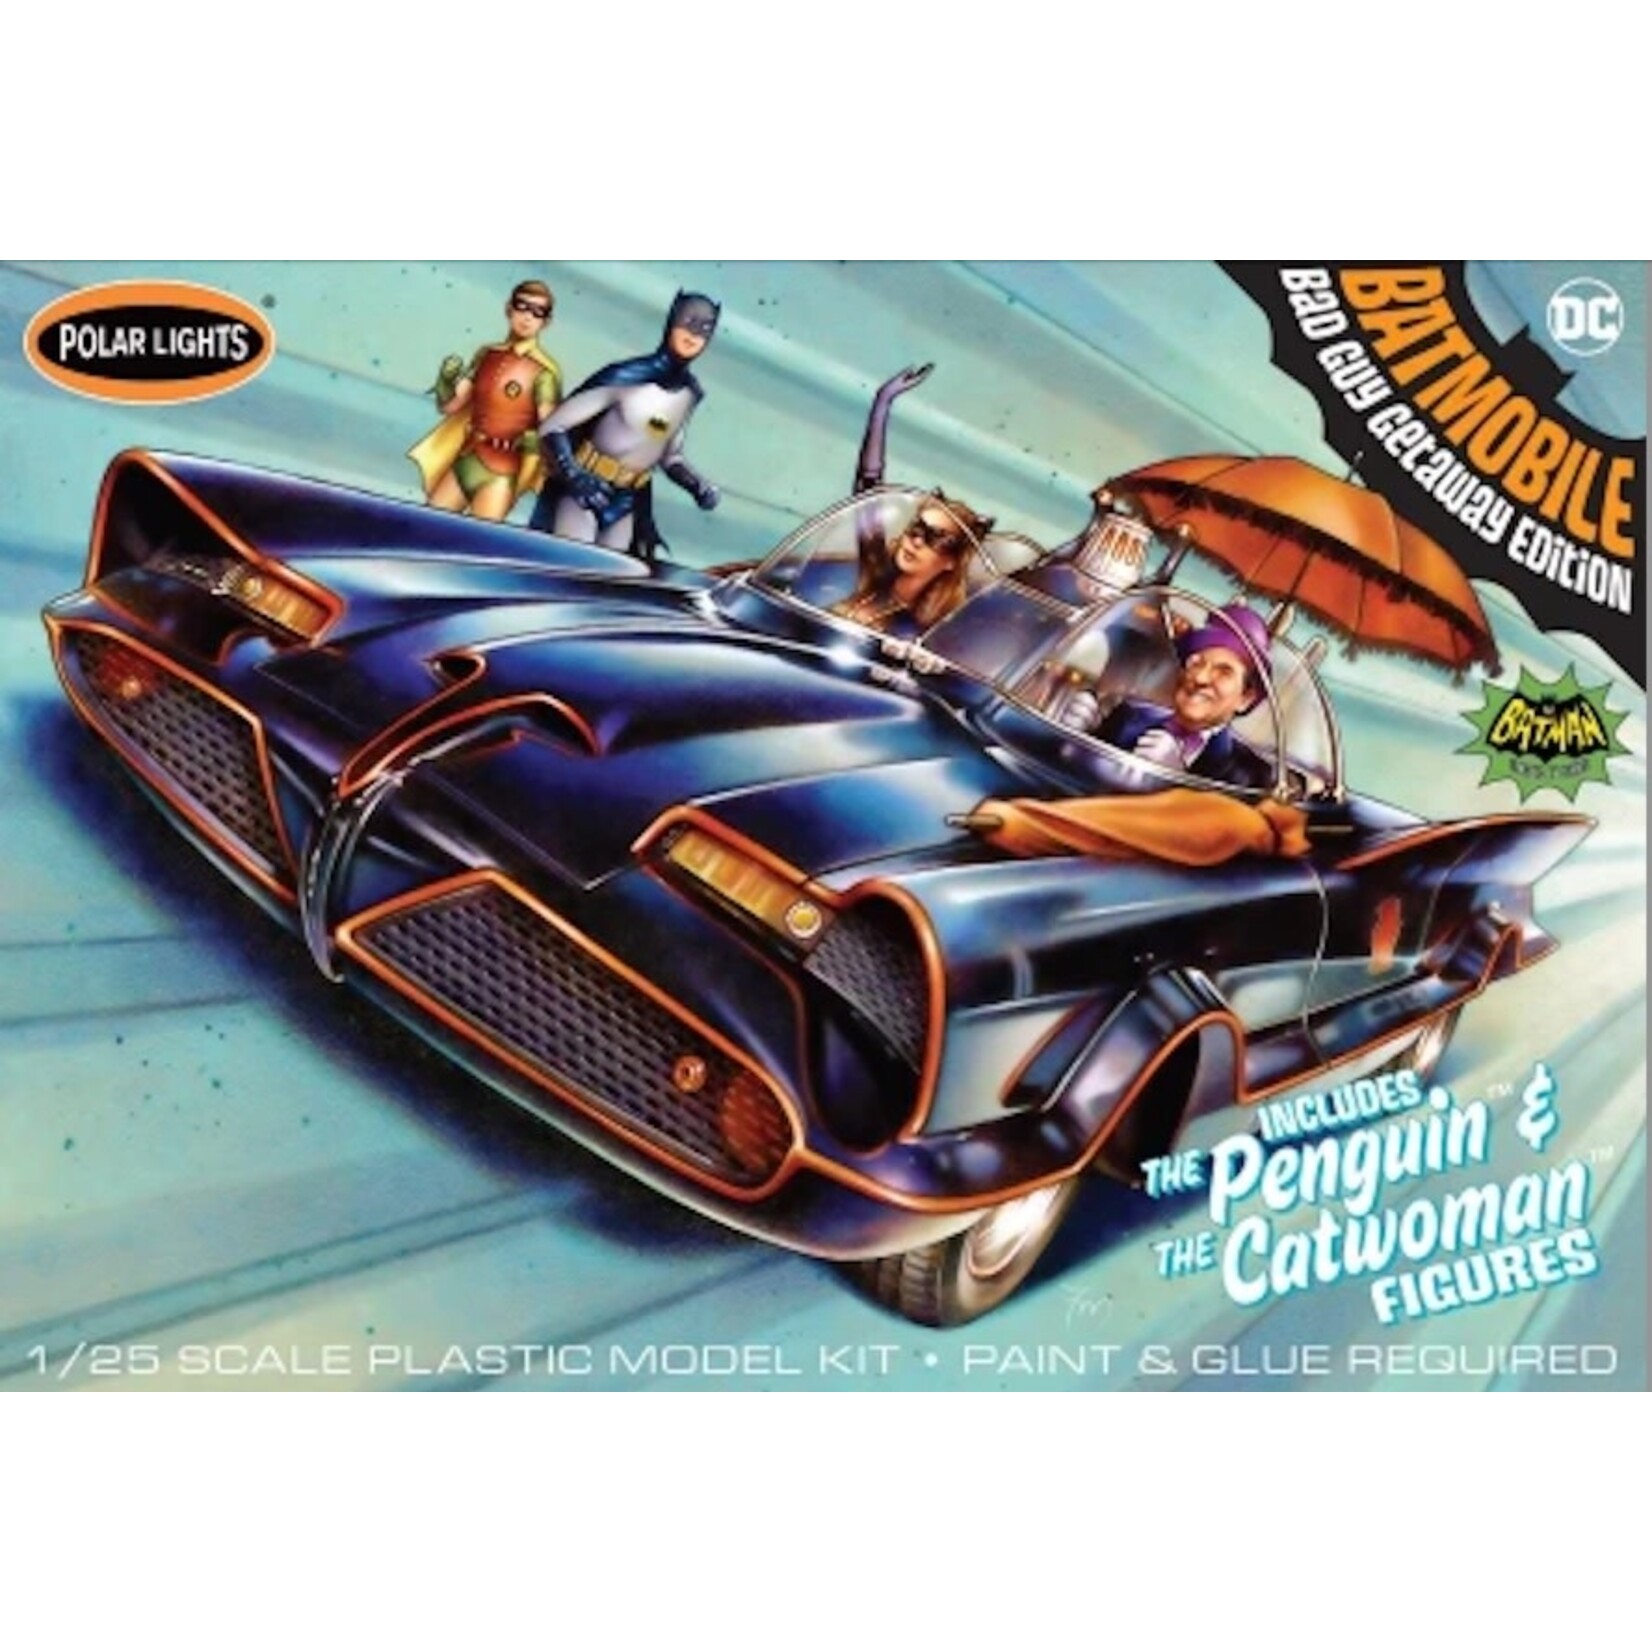 Polar Lights POL998 1966 Batmobile with Penguin and Catwoman Figures (1/25)